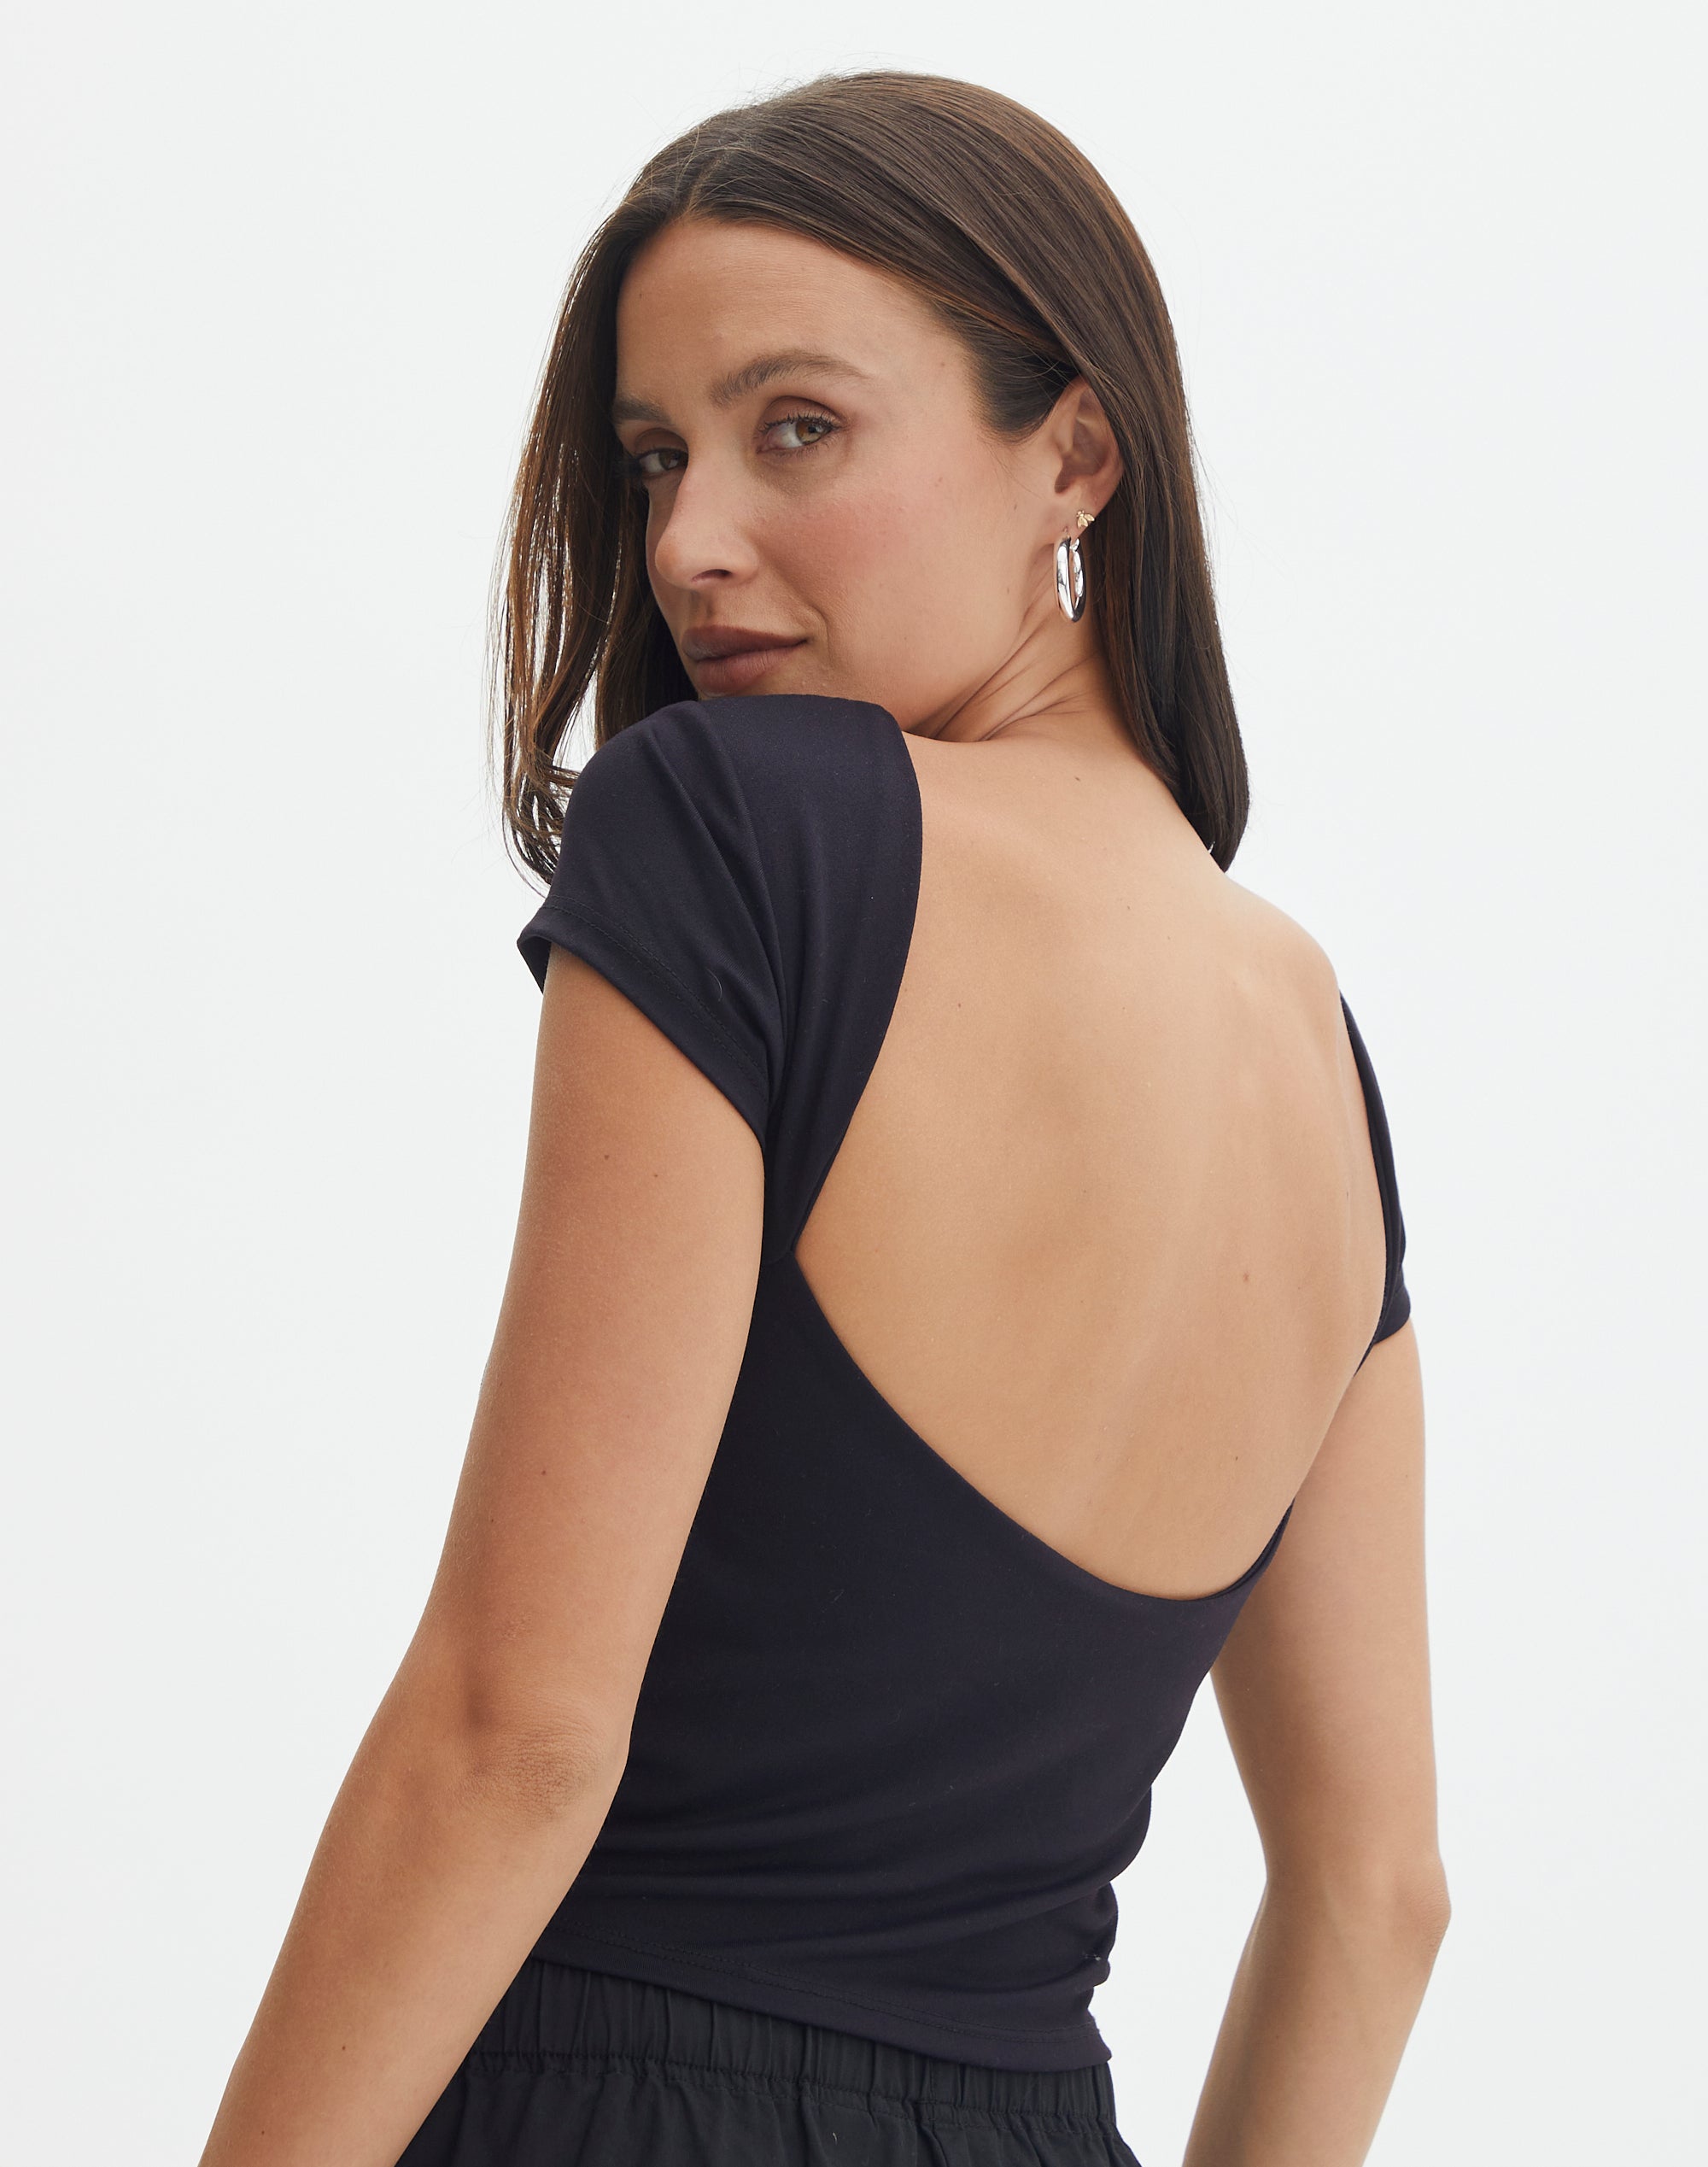 Backless Neck Shirts Top, Backless Top Short Sleeves